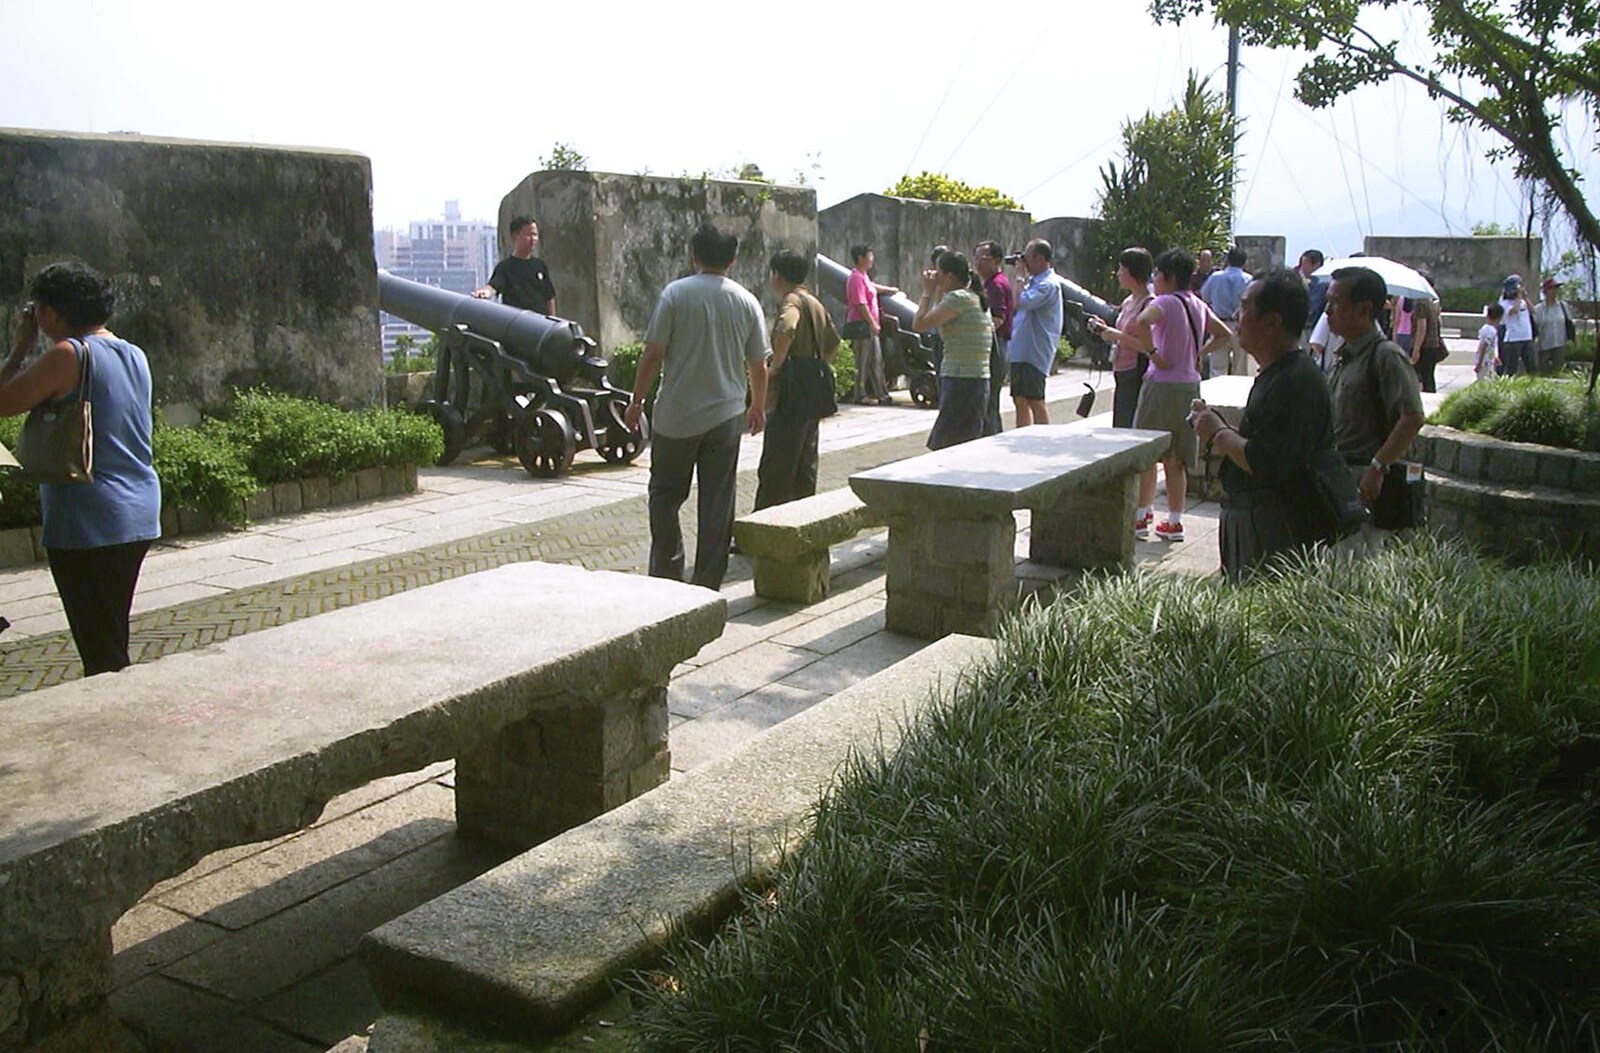 A Day Trip to Macau, China - 16th August 2001: Tourists look at cannon